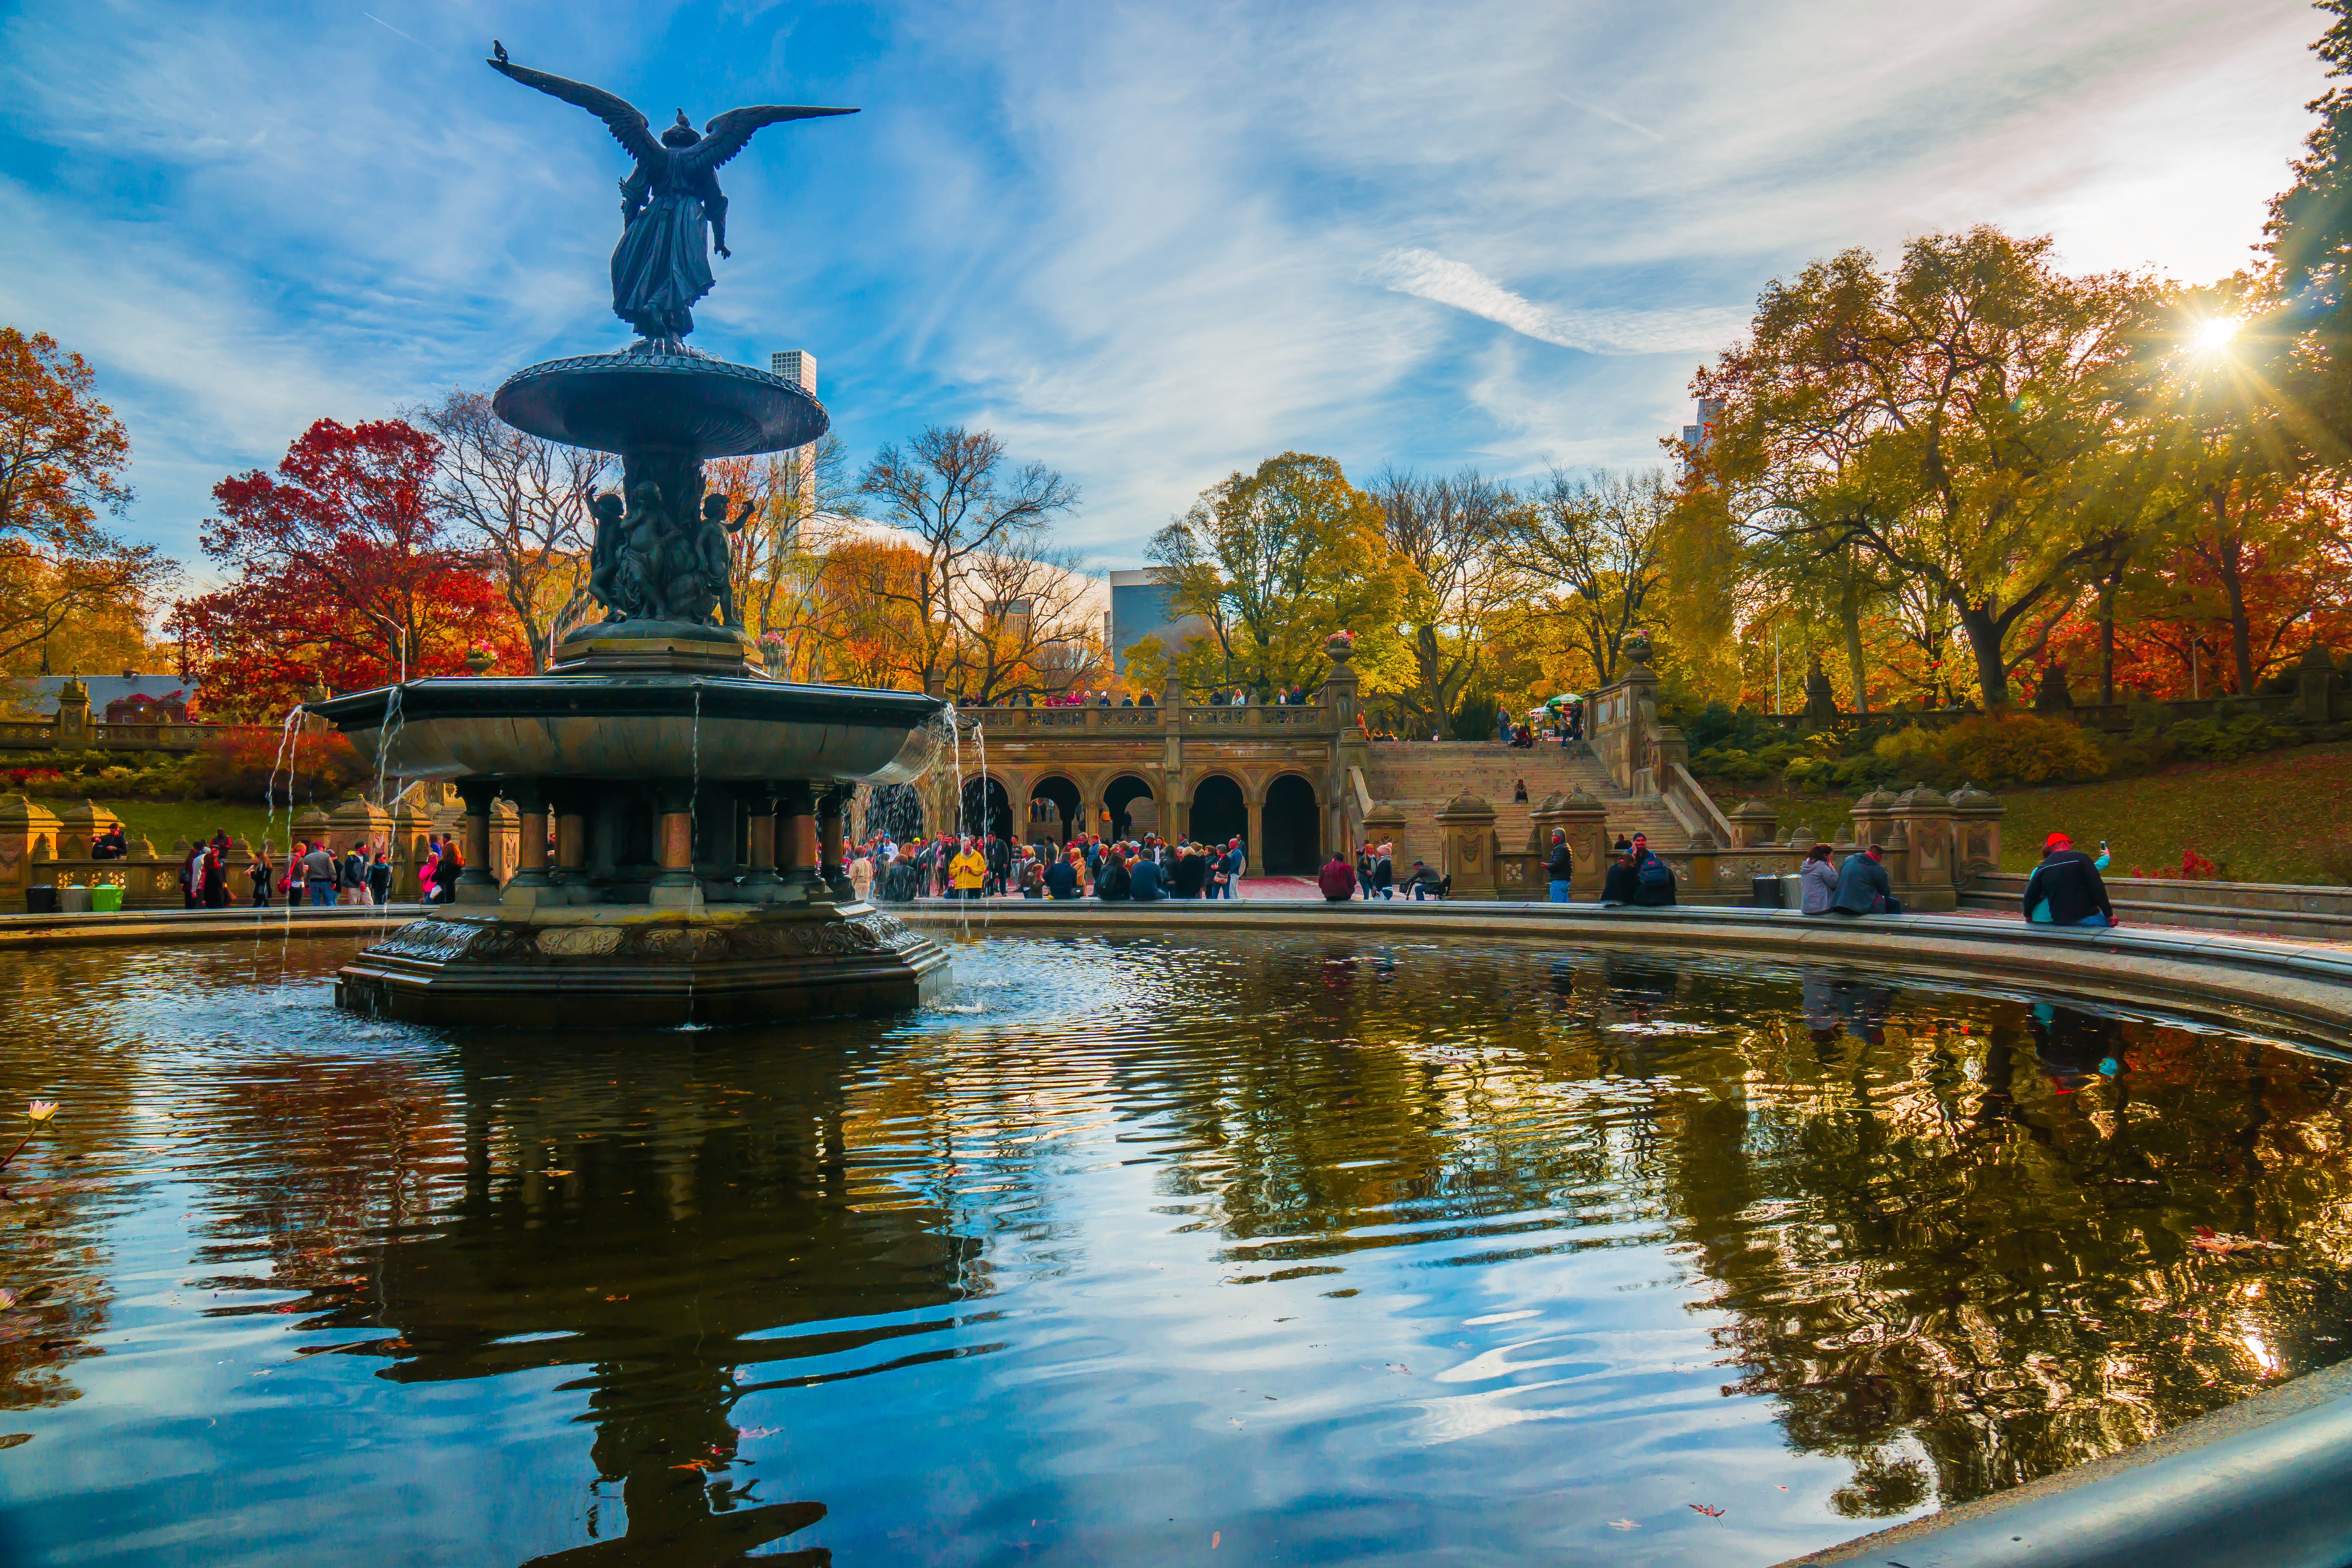 Bethesda Terrace Fountain, Angel of the Waters statue, New York City's Central Park.